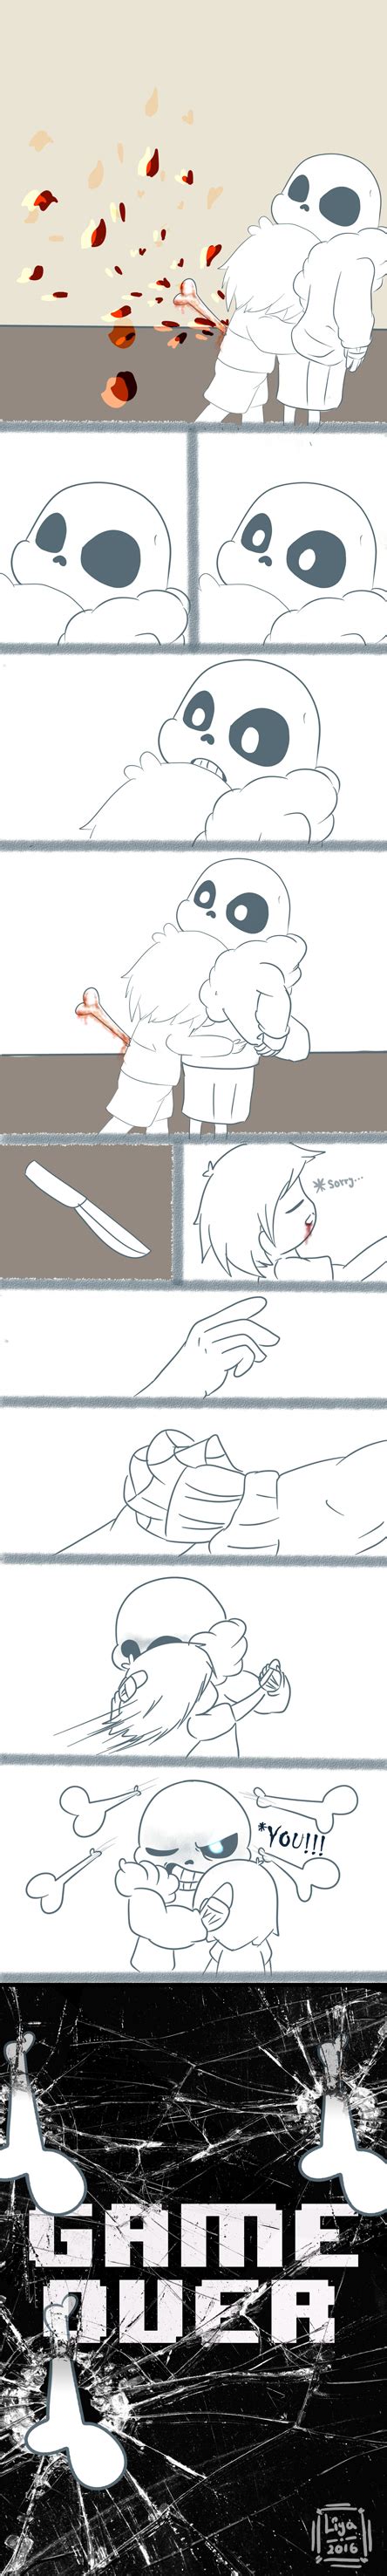 [comic] undertale you part 2 2 by janis roxas on deviantart